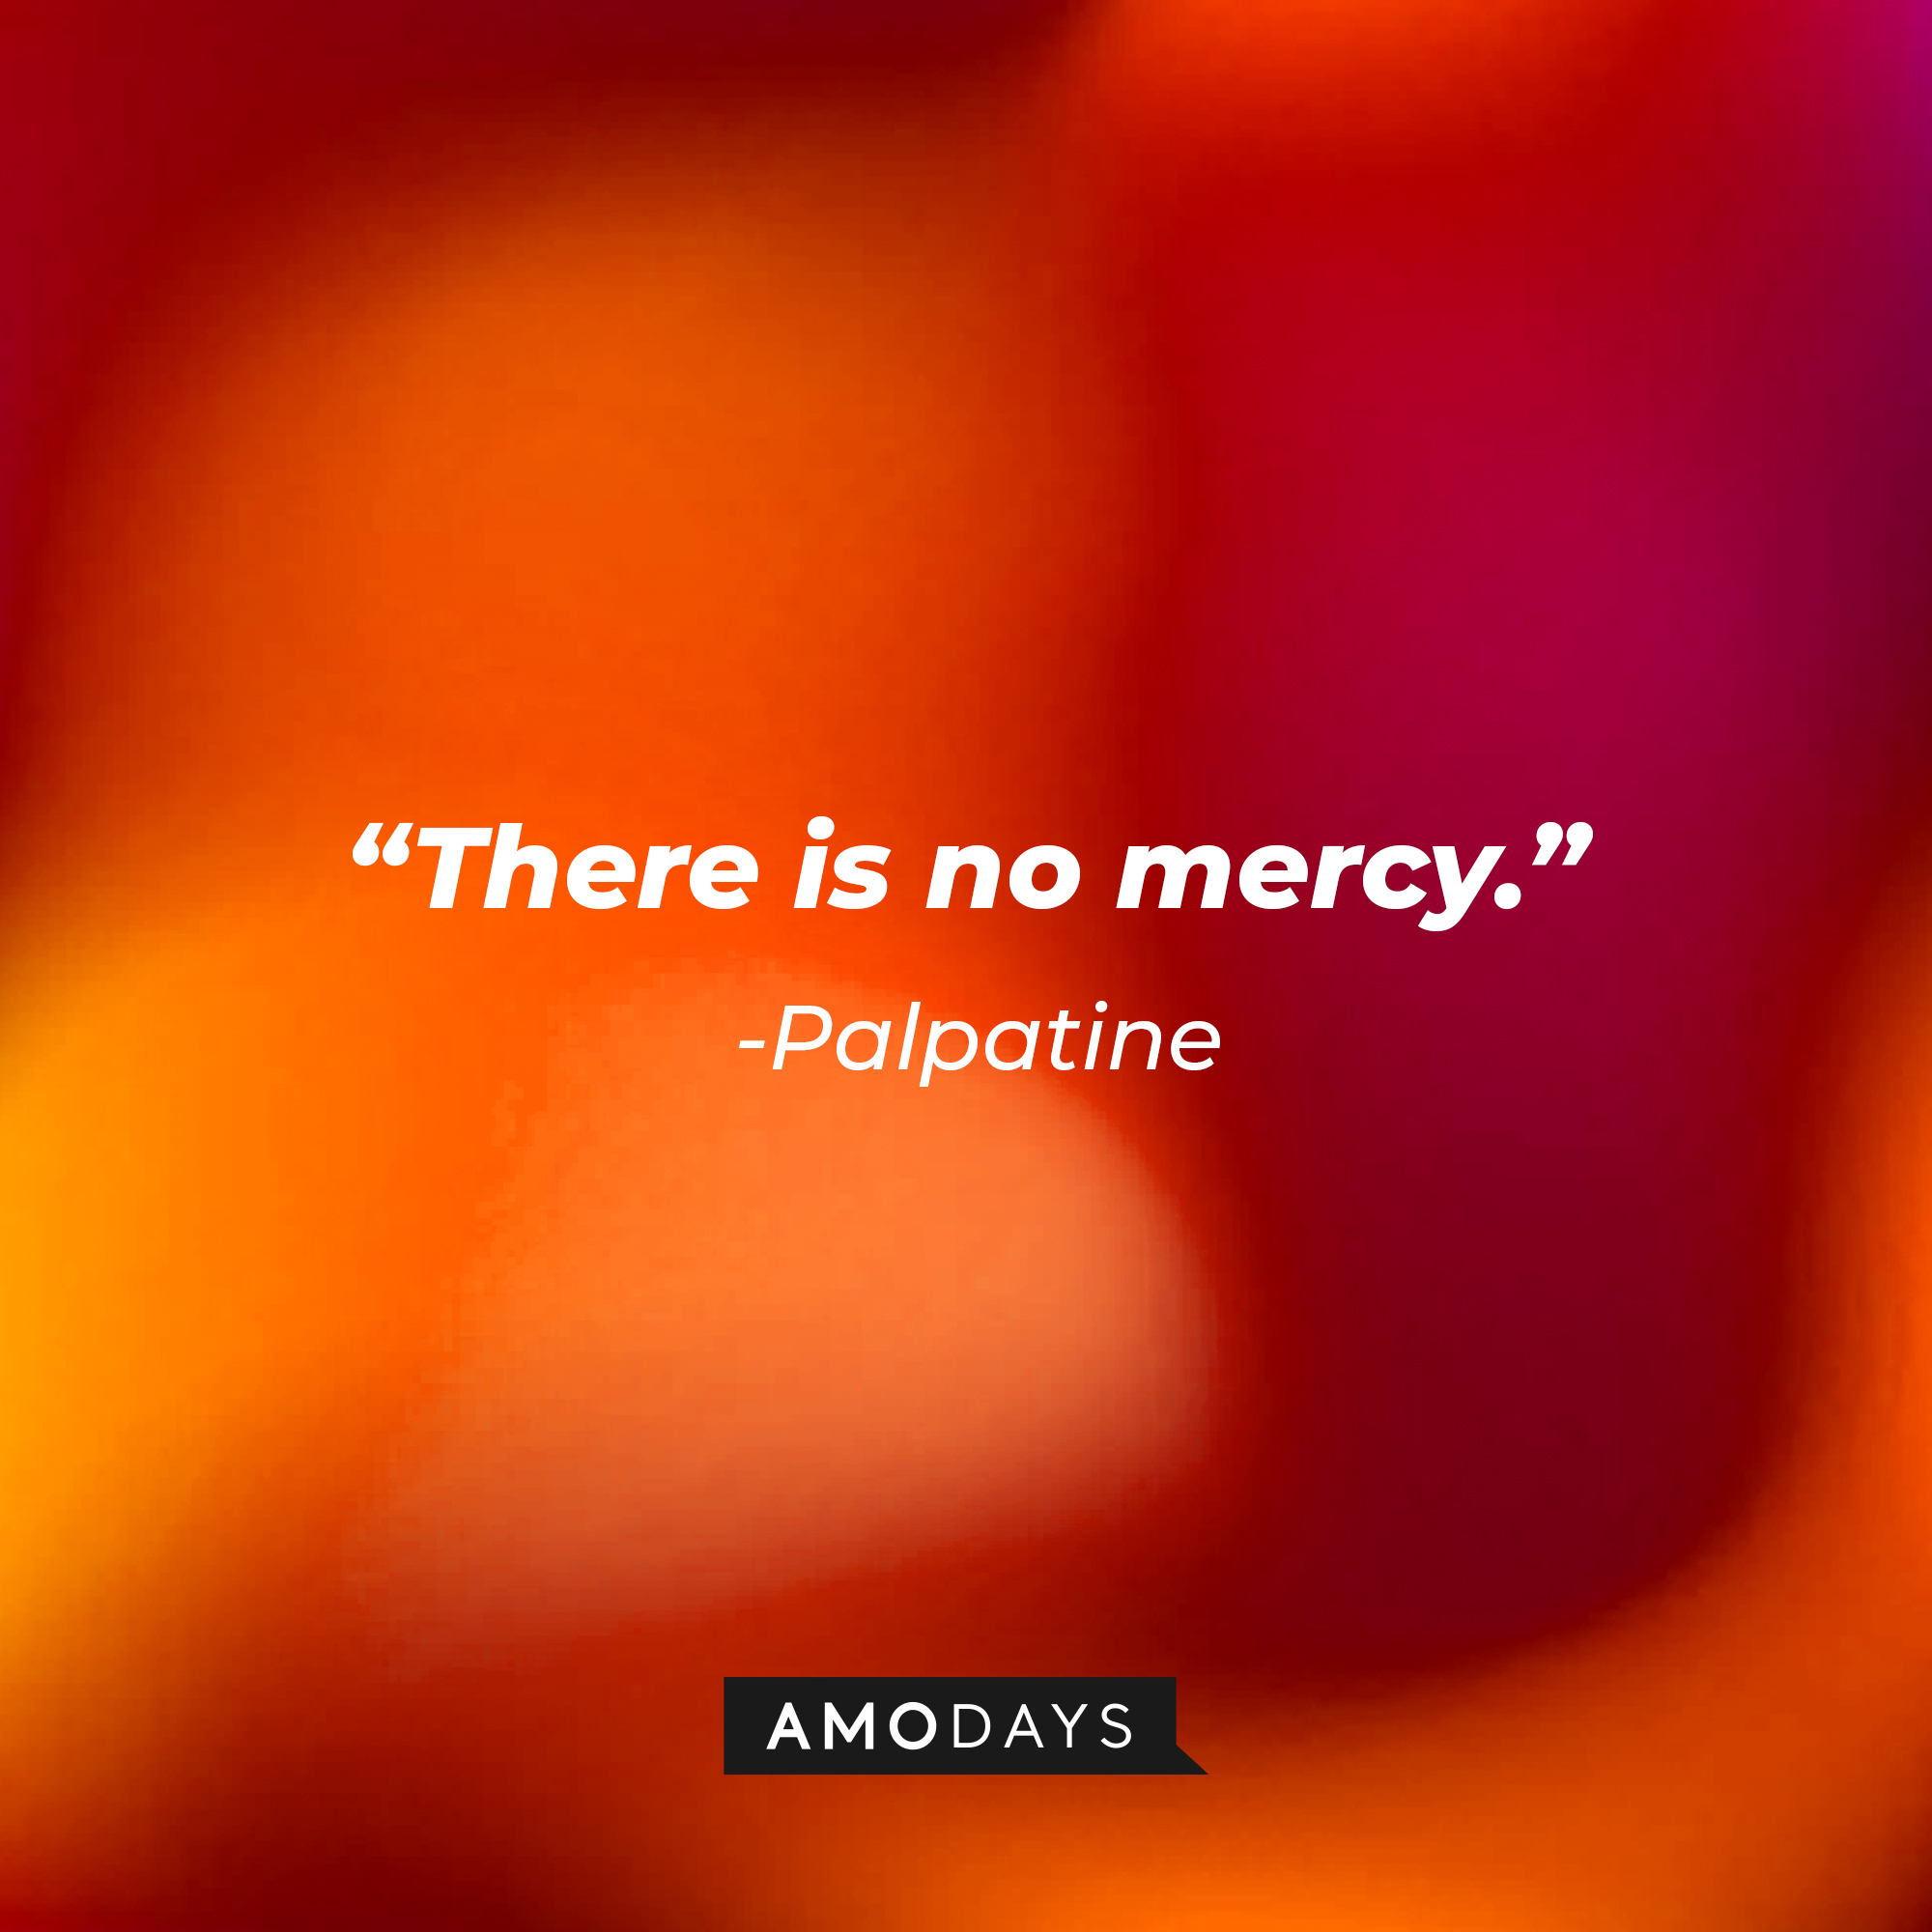 Palpatine’s quote: “There is no mercy.” | Source: AmoDays